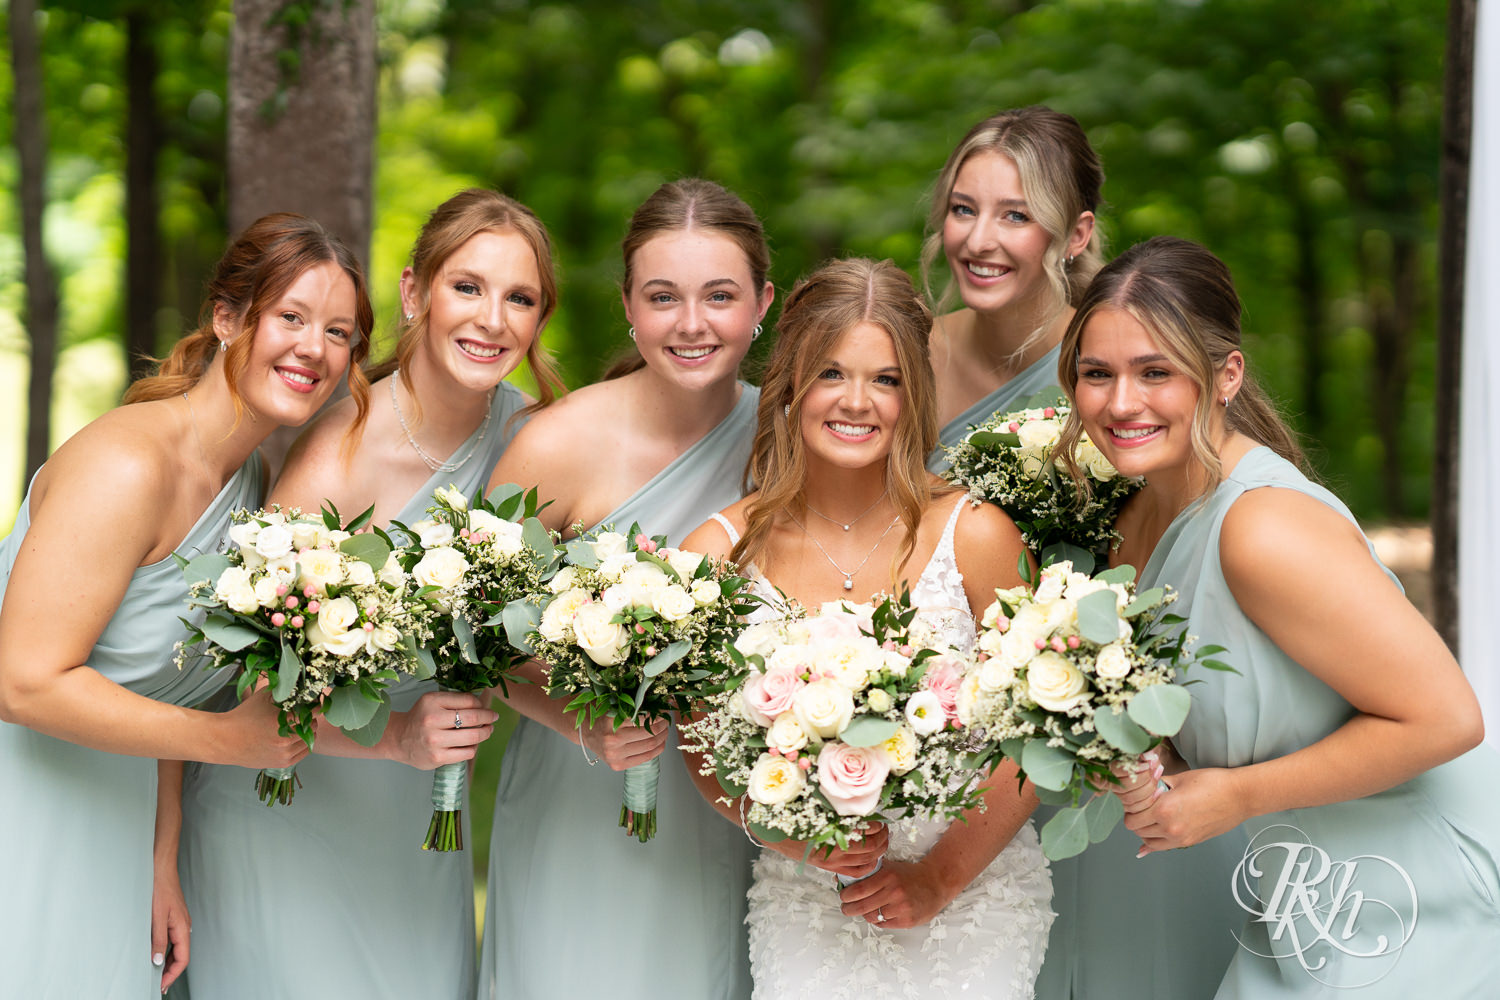 Bride smiles with wedding party on wedding day at Ahavah Cottage in Elysian, Minnesota.